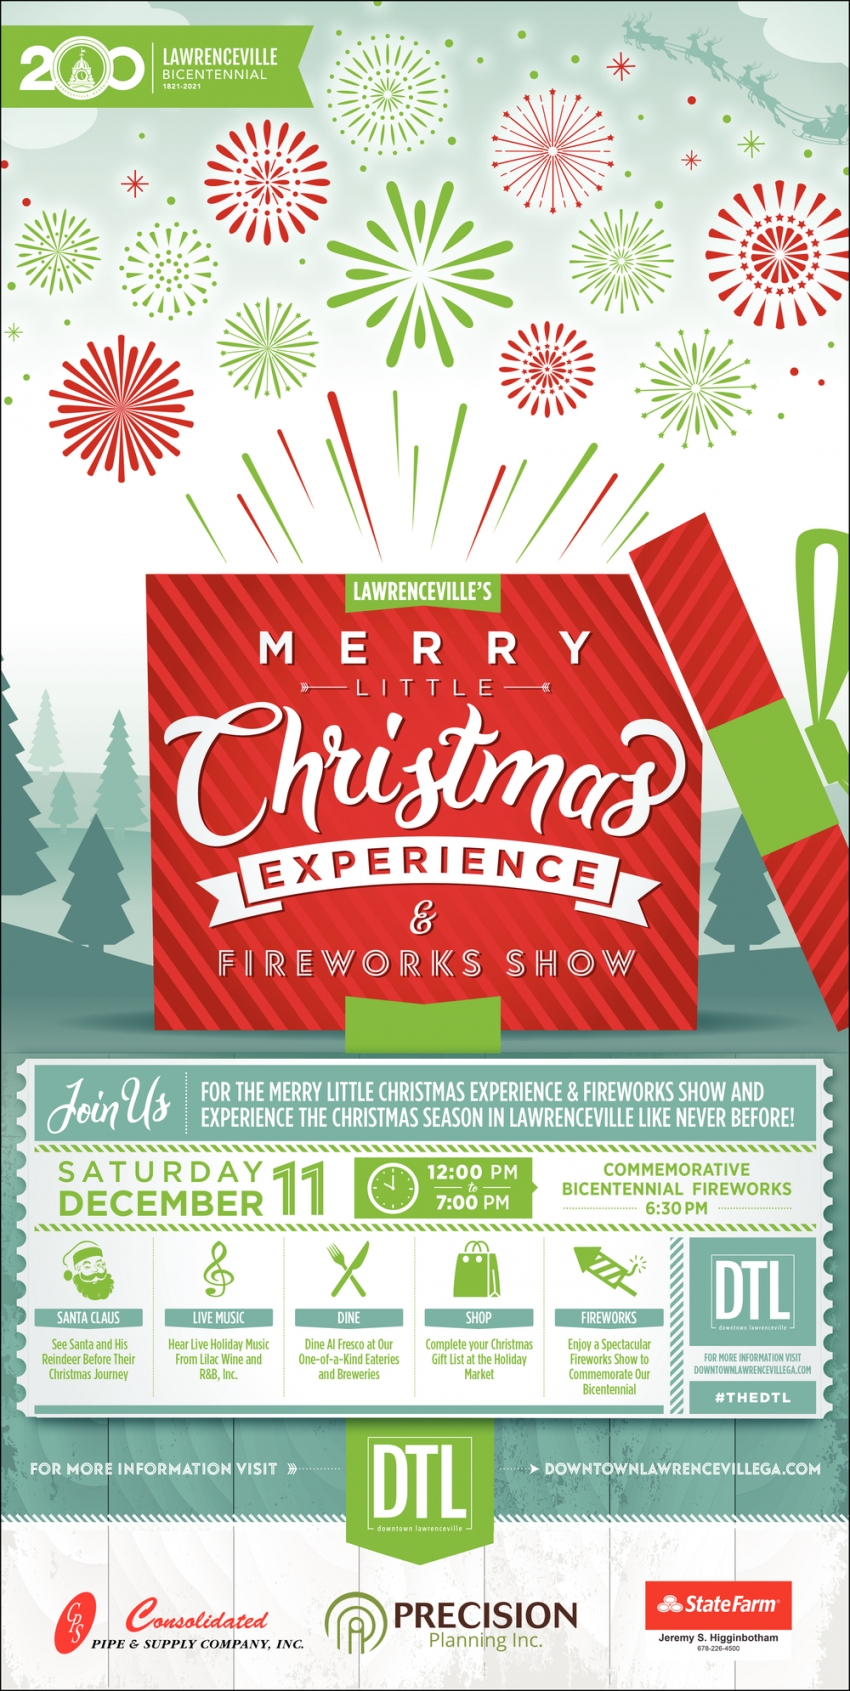 Merry Little Christmas Experience & Fireworks Show